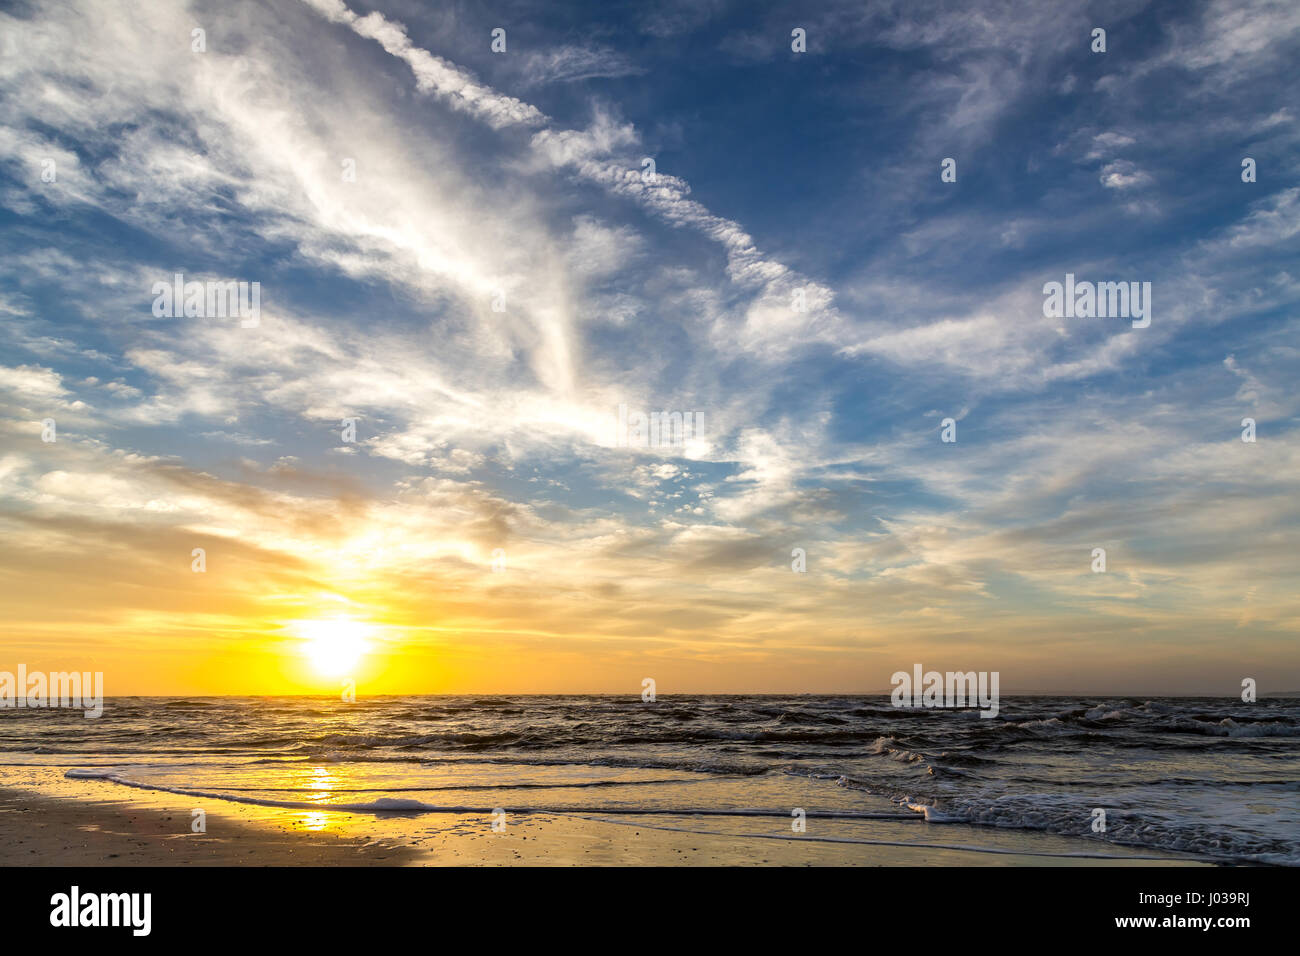 The sun rises at the beach on a cloudy morning over Amelia Island, Florida. Stock Photo